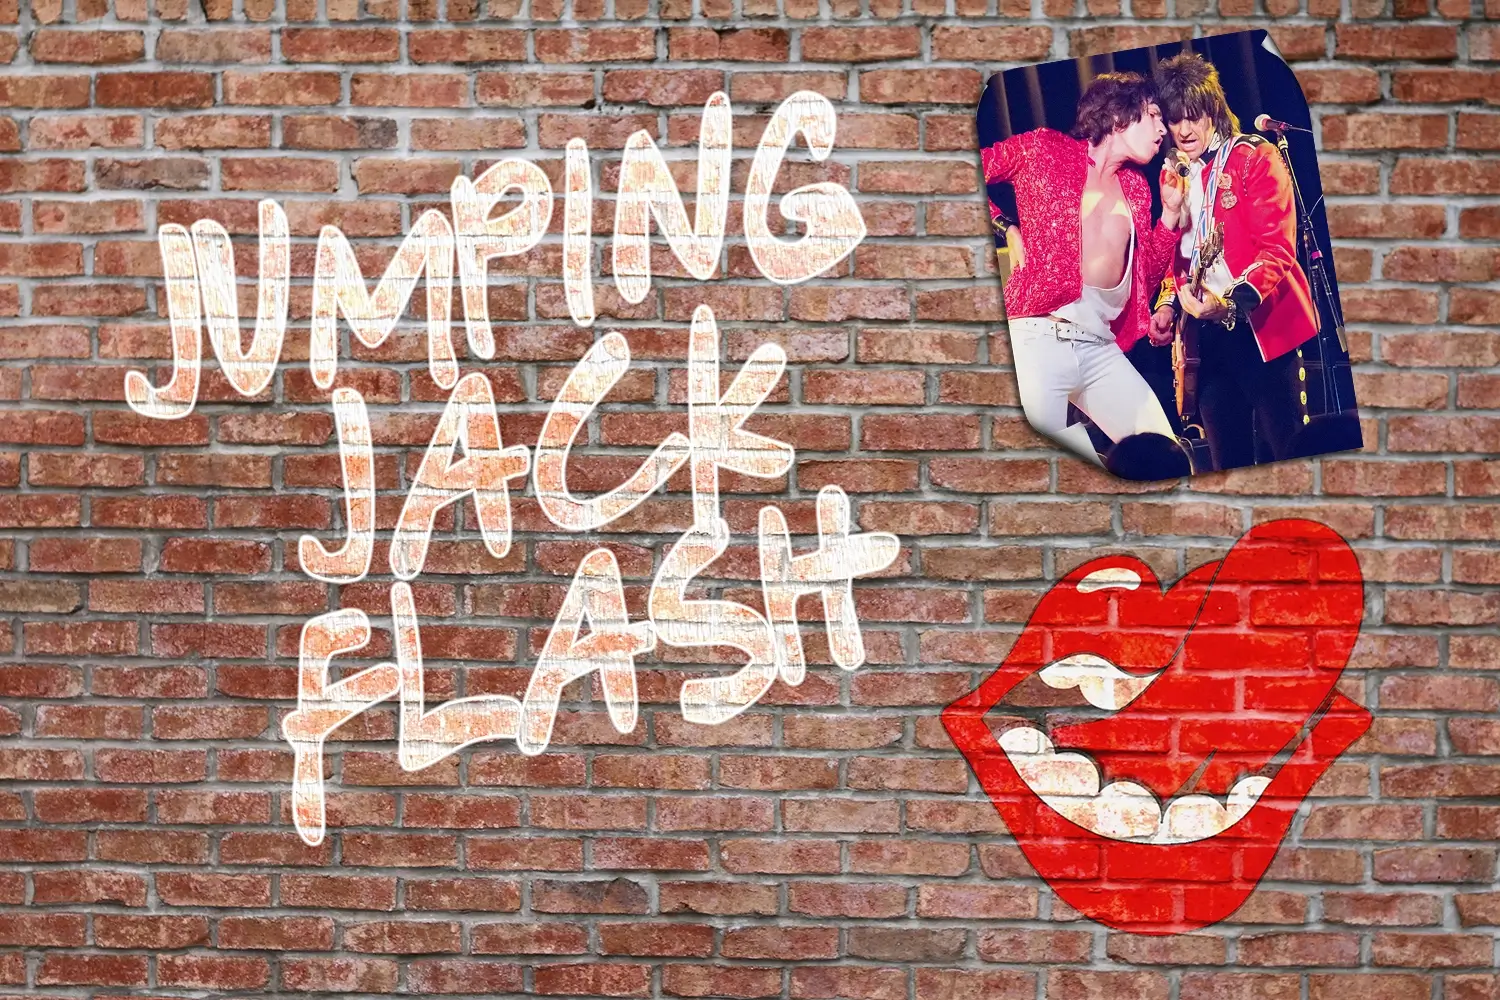 Jumping Jack Flash | Media - Gallery, photos, video, and promo